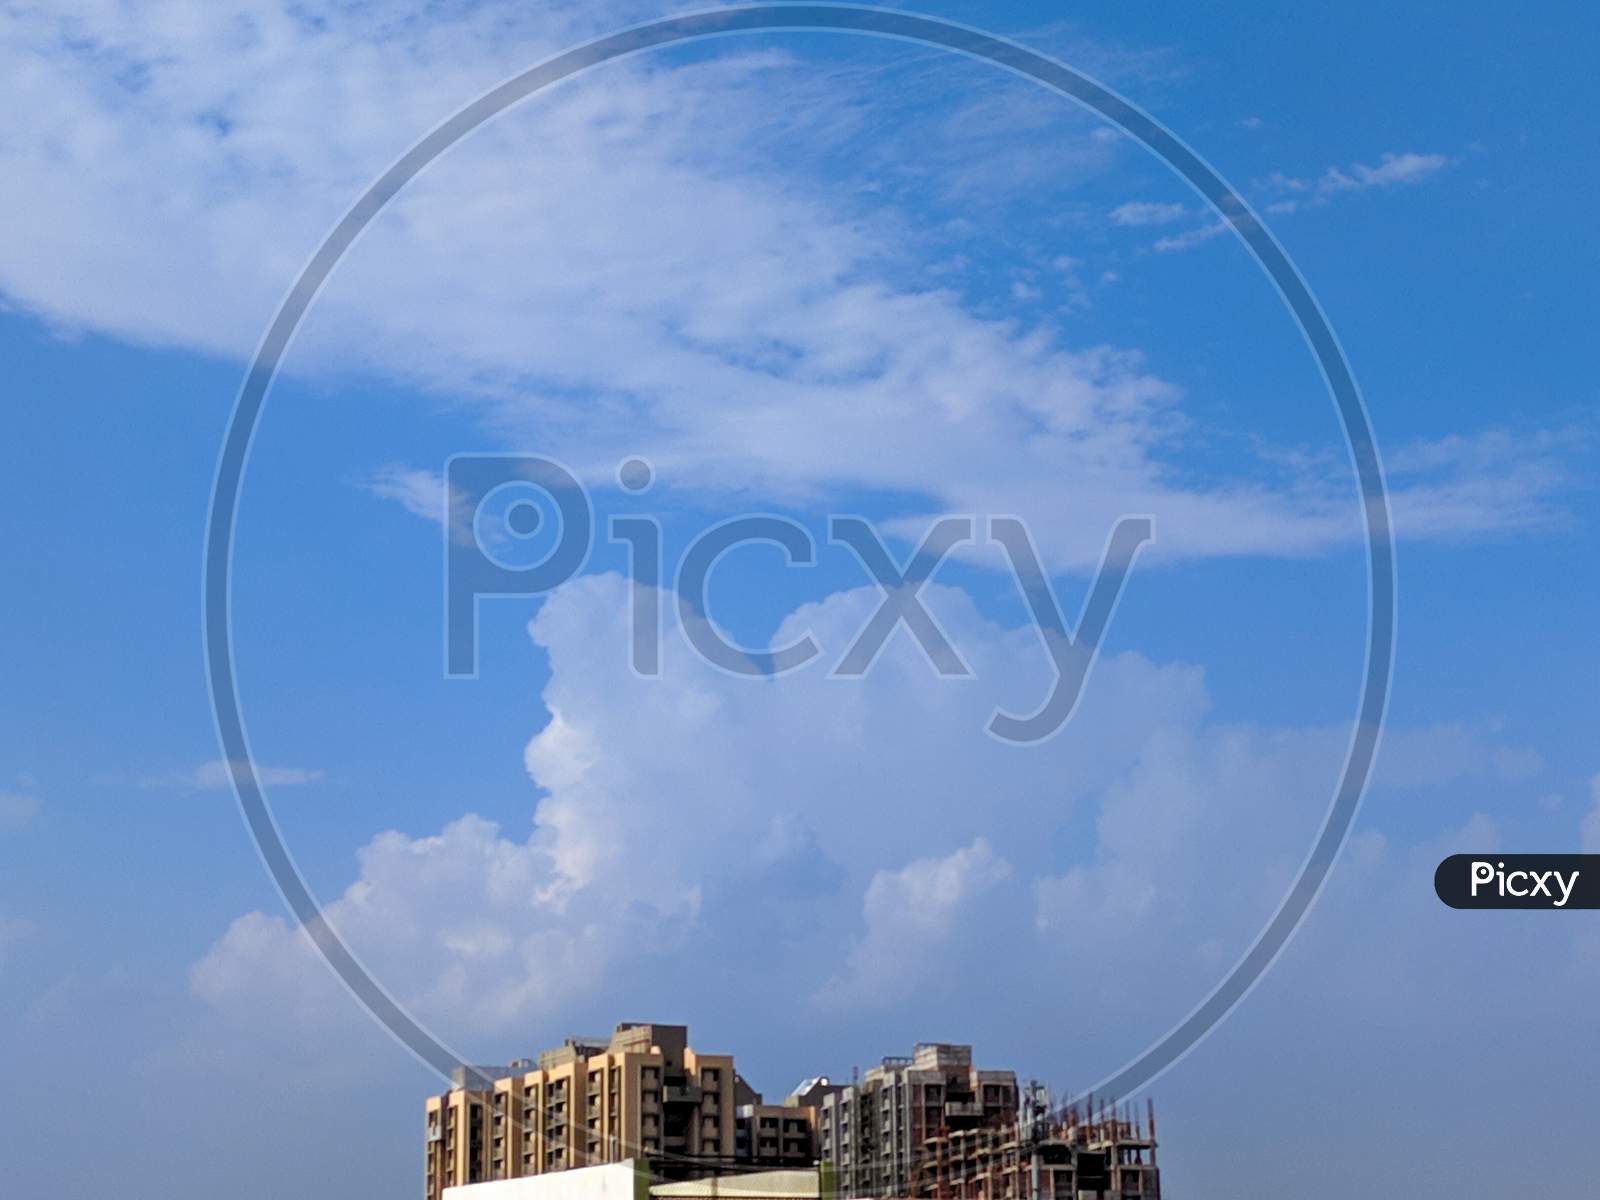 Top of the building with blue clouds